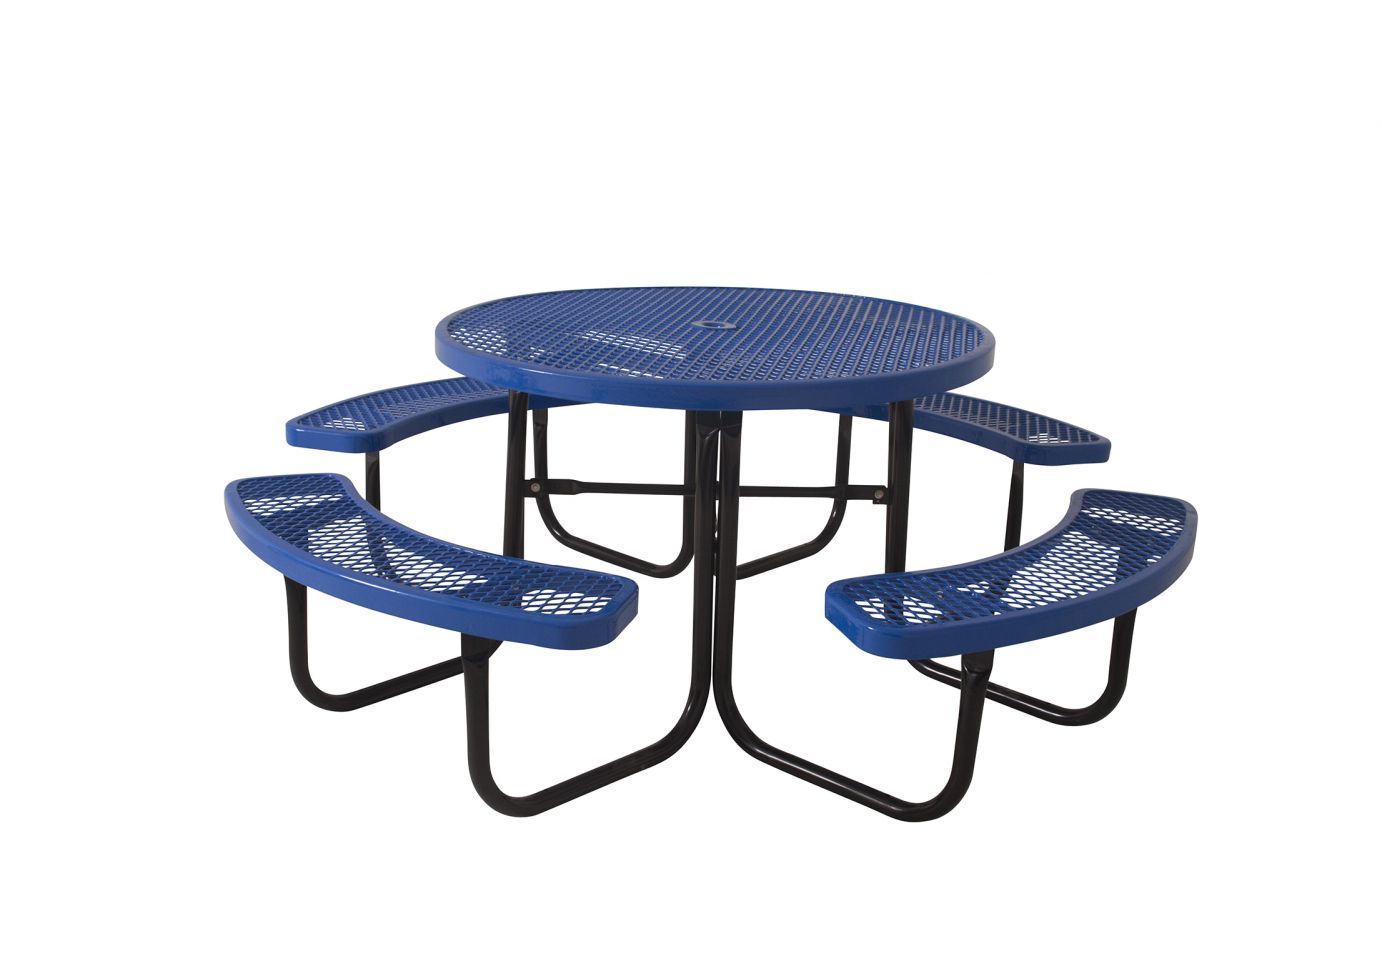 ADA 2-Seat Table with Round Arms